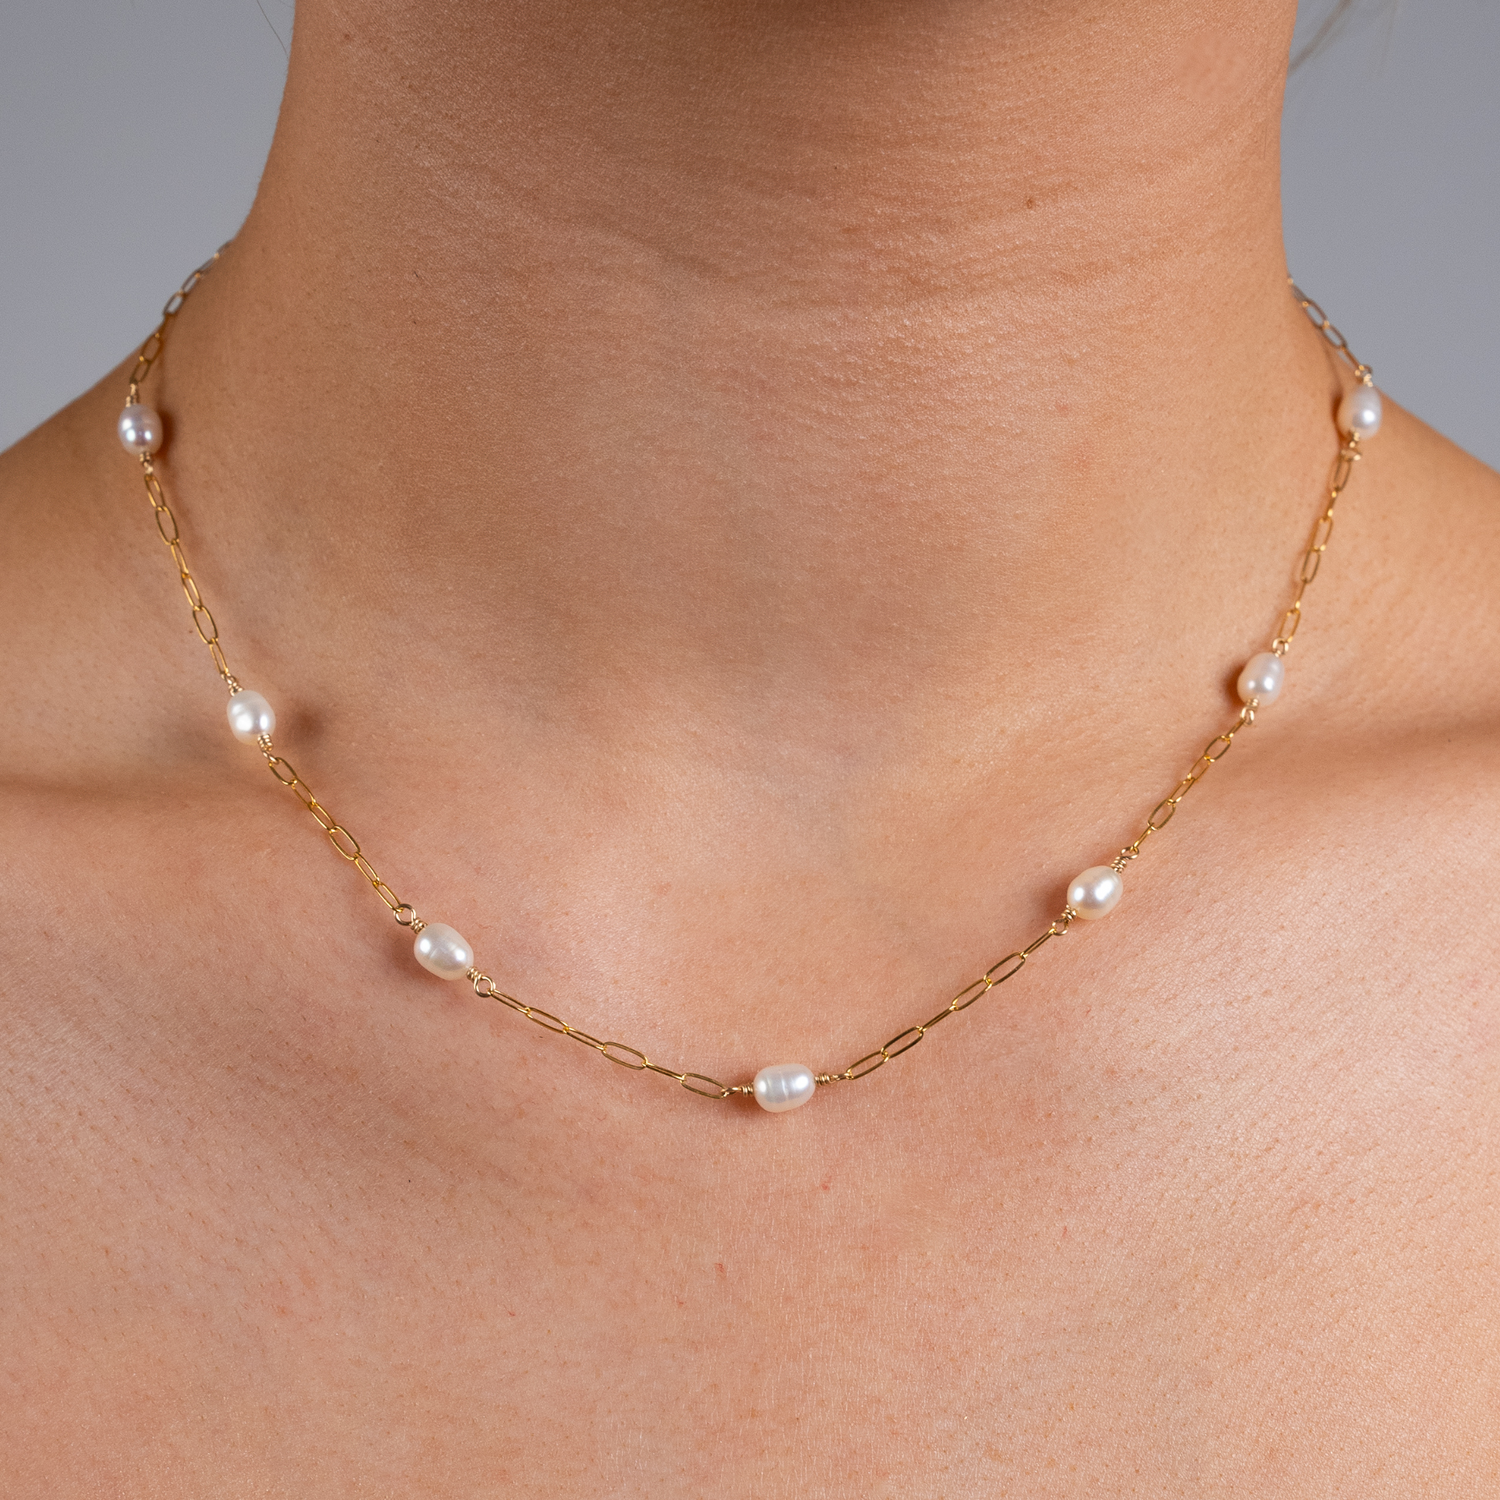 Mabel - Buy Mabel Gold Layered Pearl Necklace